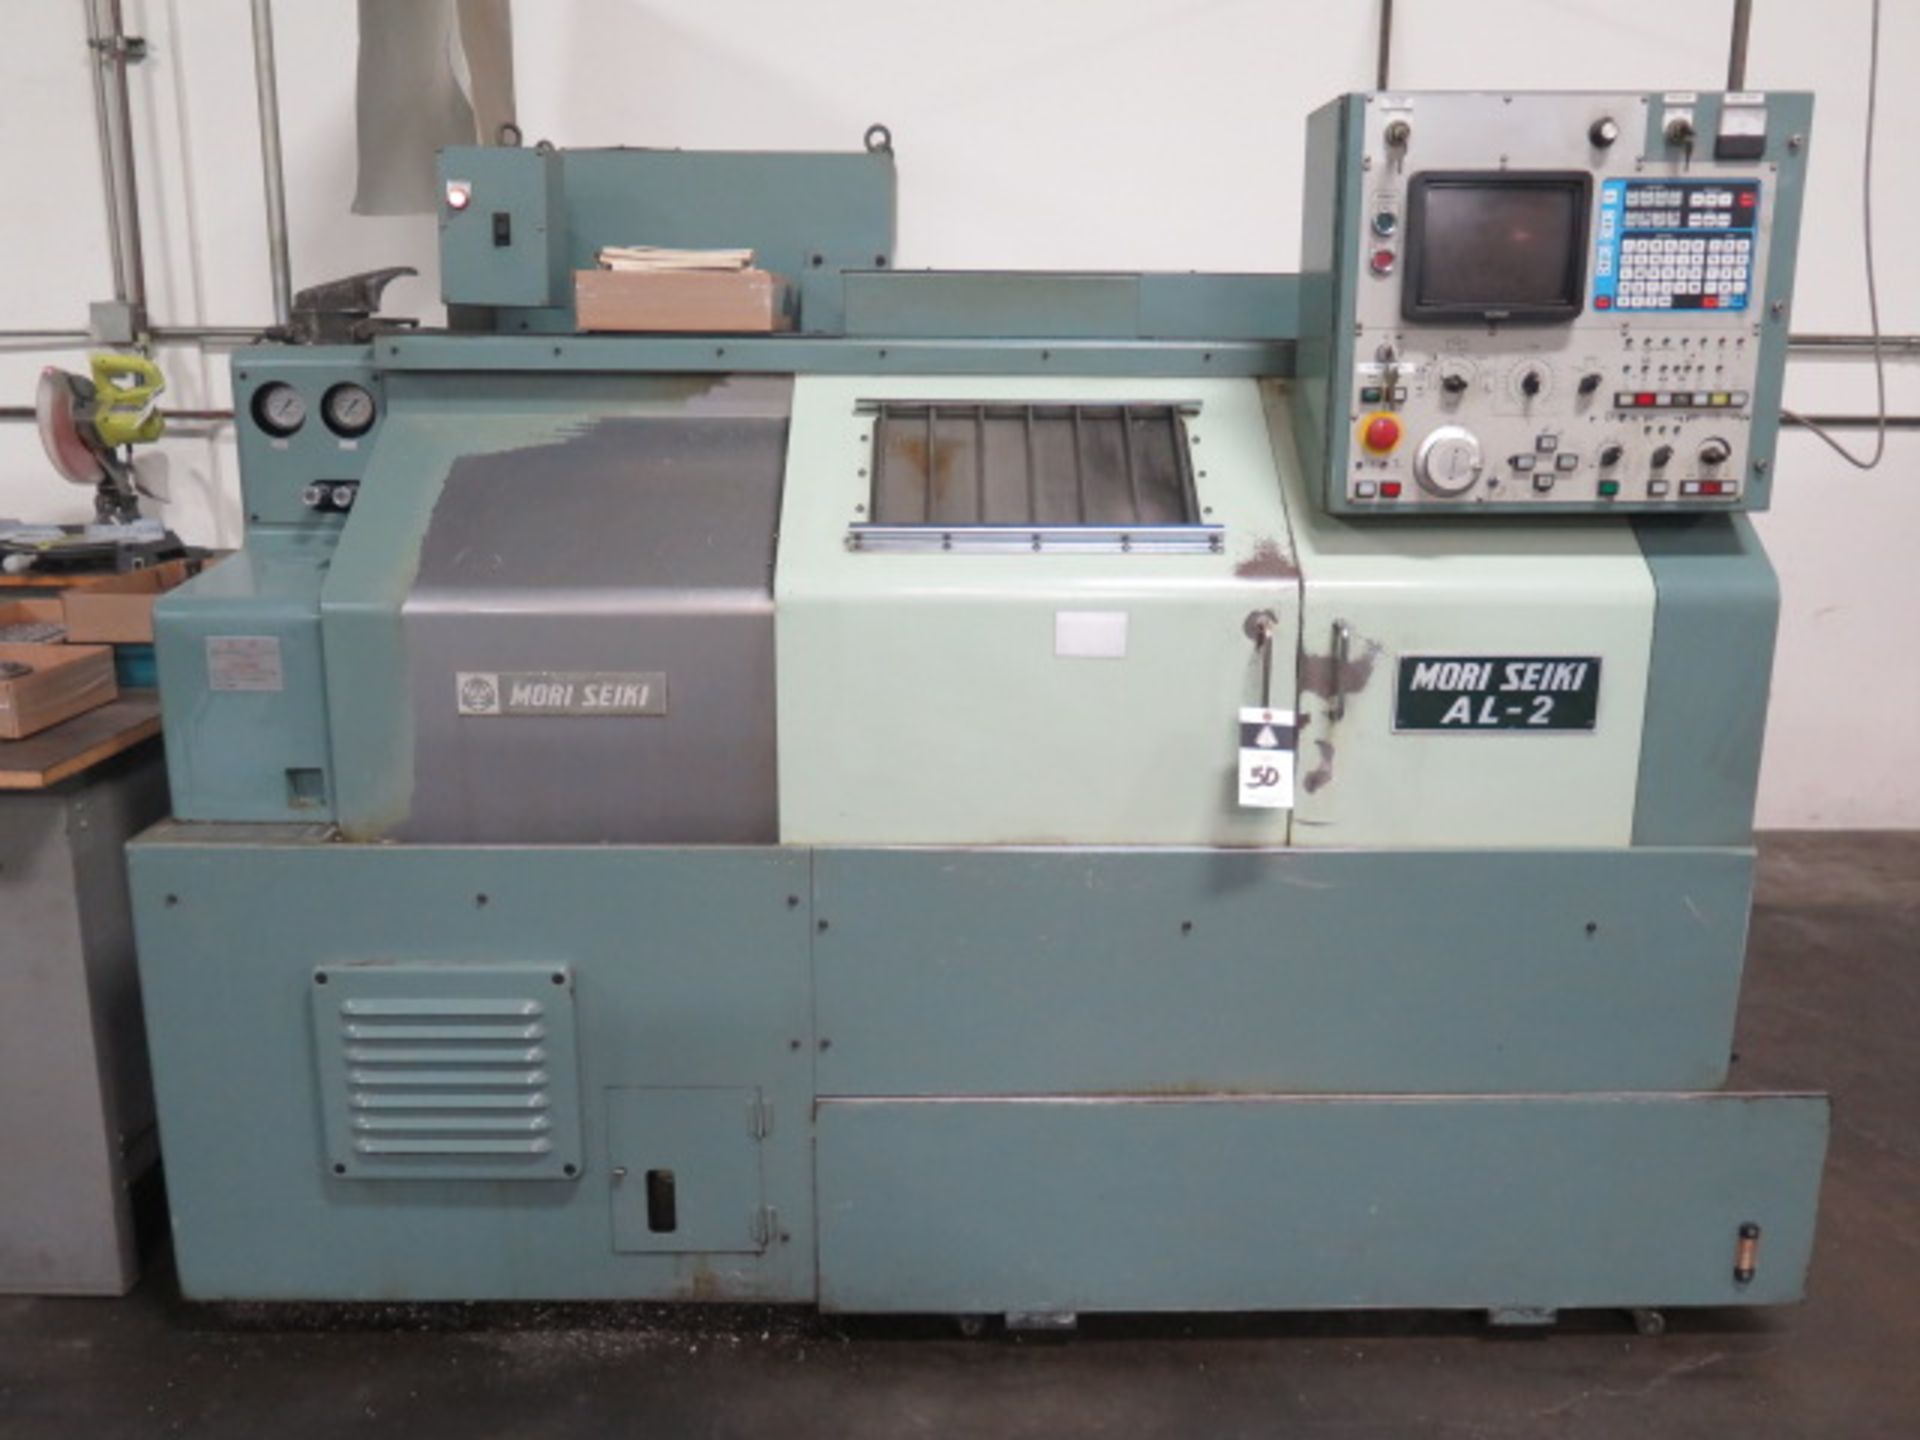 Mori Seiki AL-2ATM CNC Lathe s/n 58 w/ Yasnac Controls, Tool Presetter, 8-Station Turret, SOLD AS IS